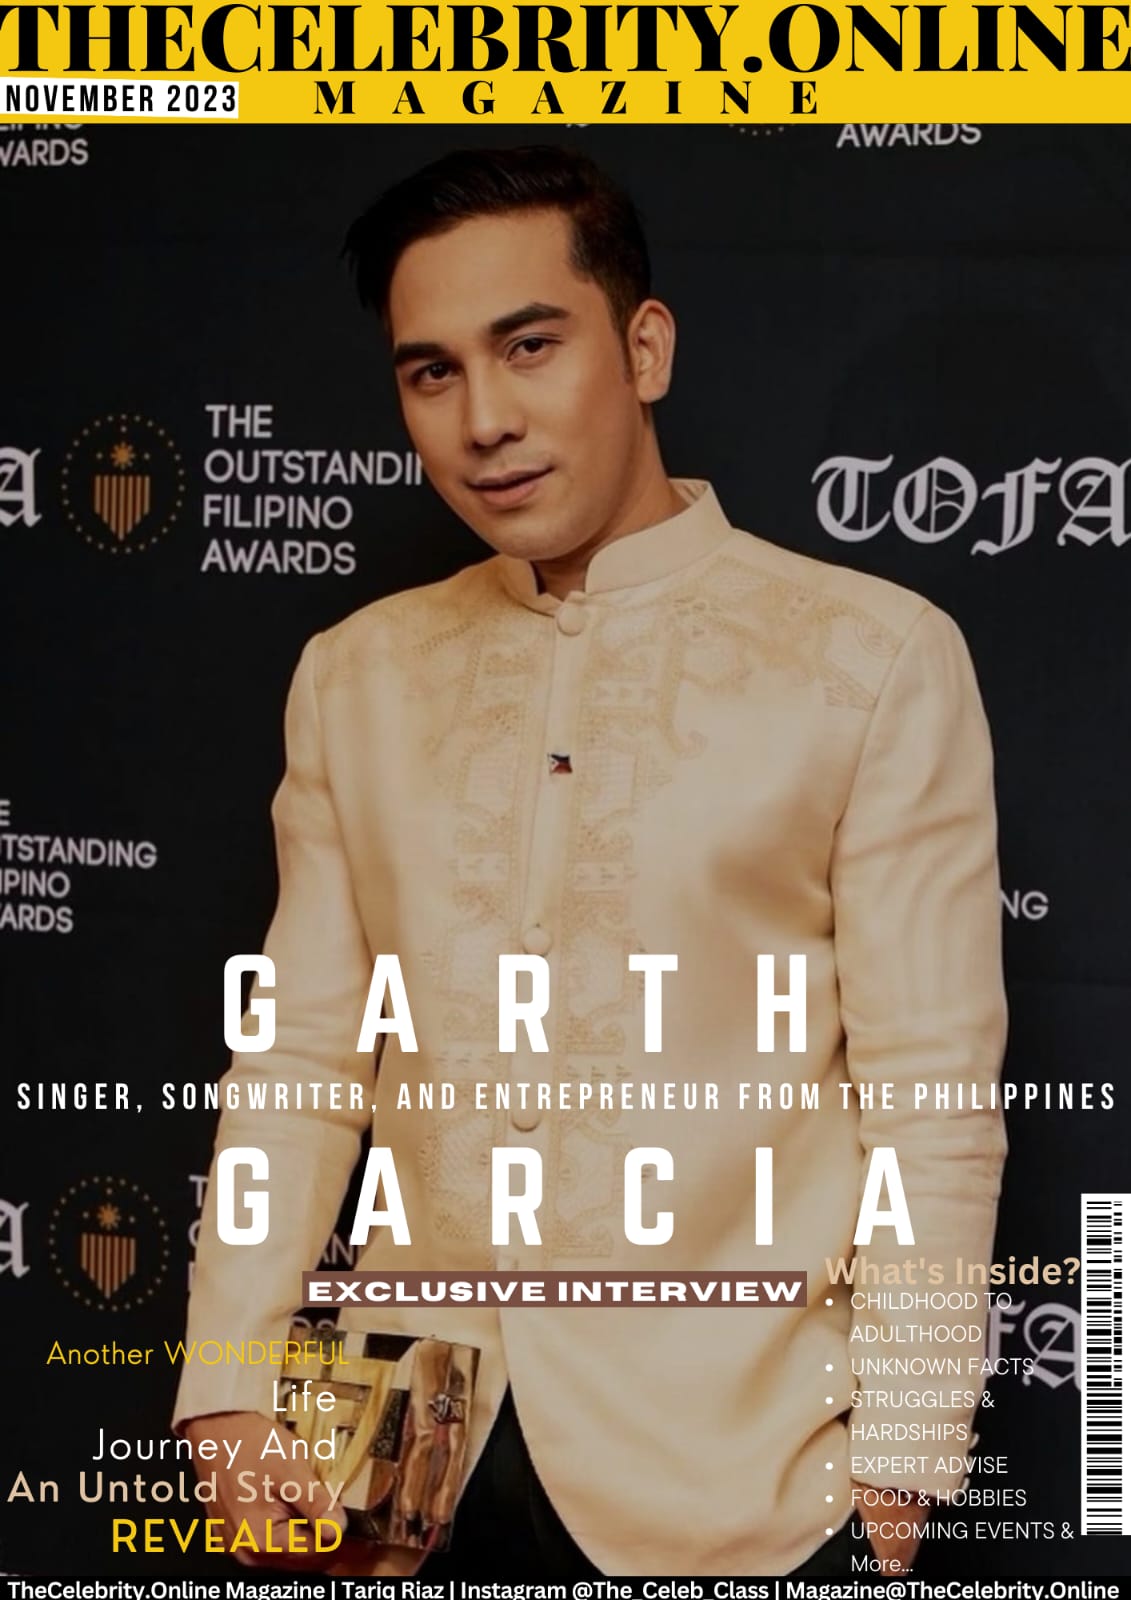 Garth Garcia Singer, Songwriter, and Entrepreneur from the Philippines – Exclusive Interview